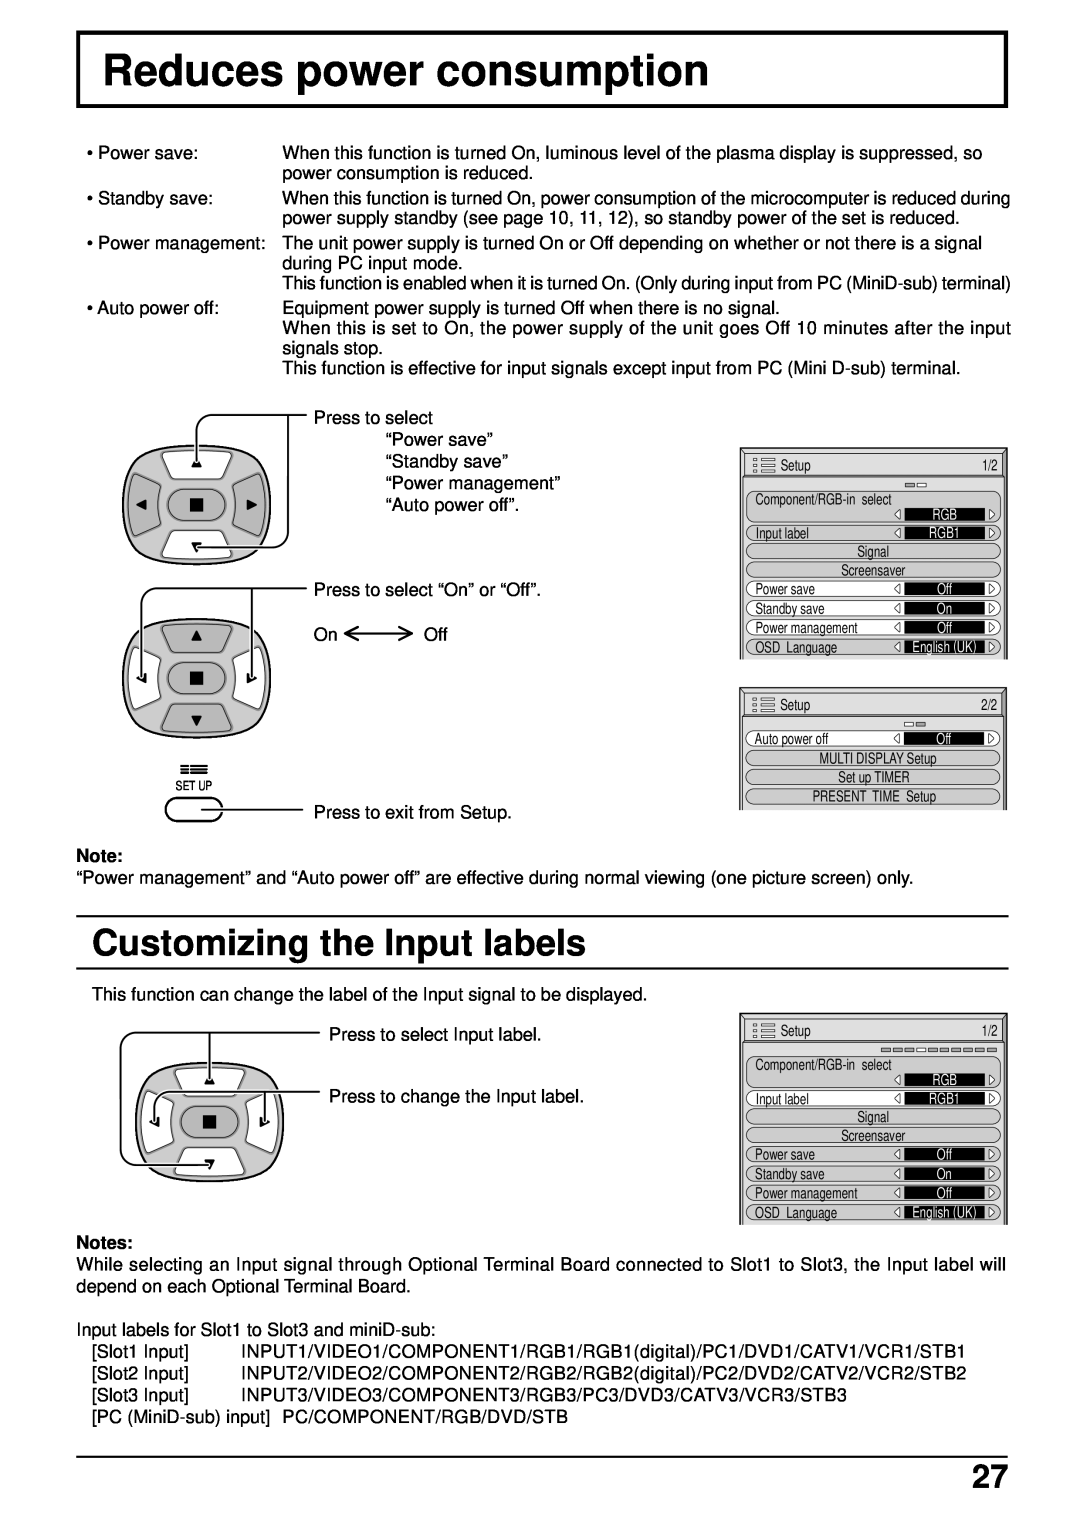 JVC GD-V502PCE manual Reduces power consumption, Customizing the Input labels 